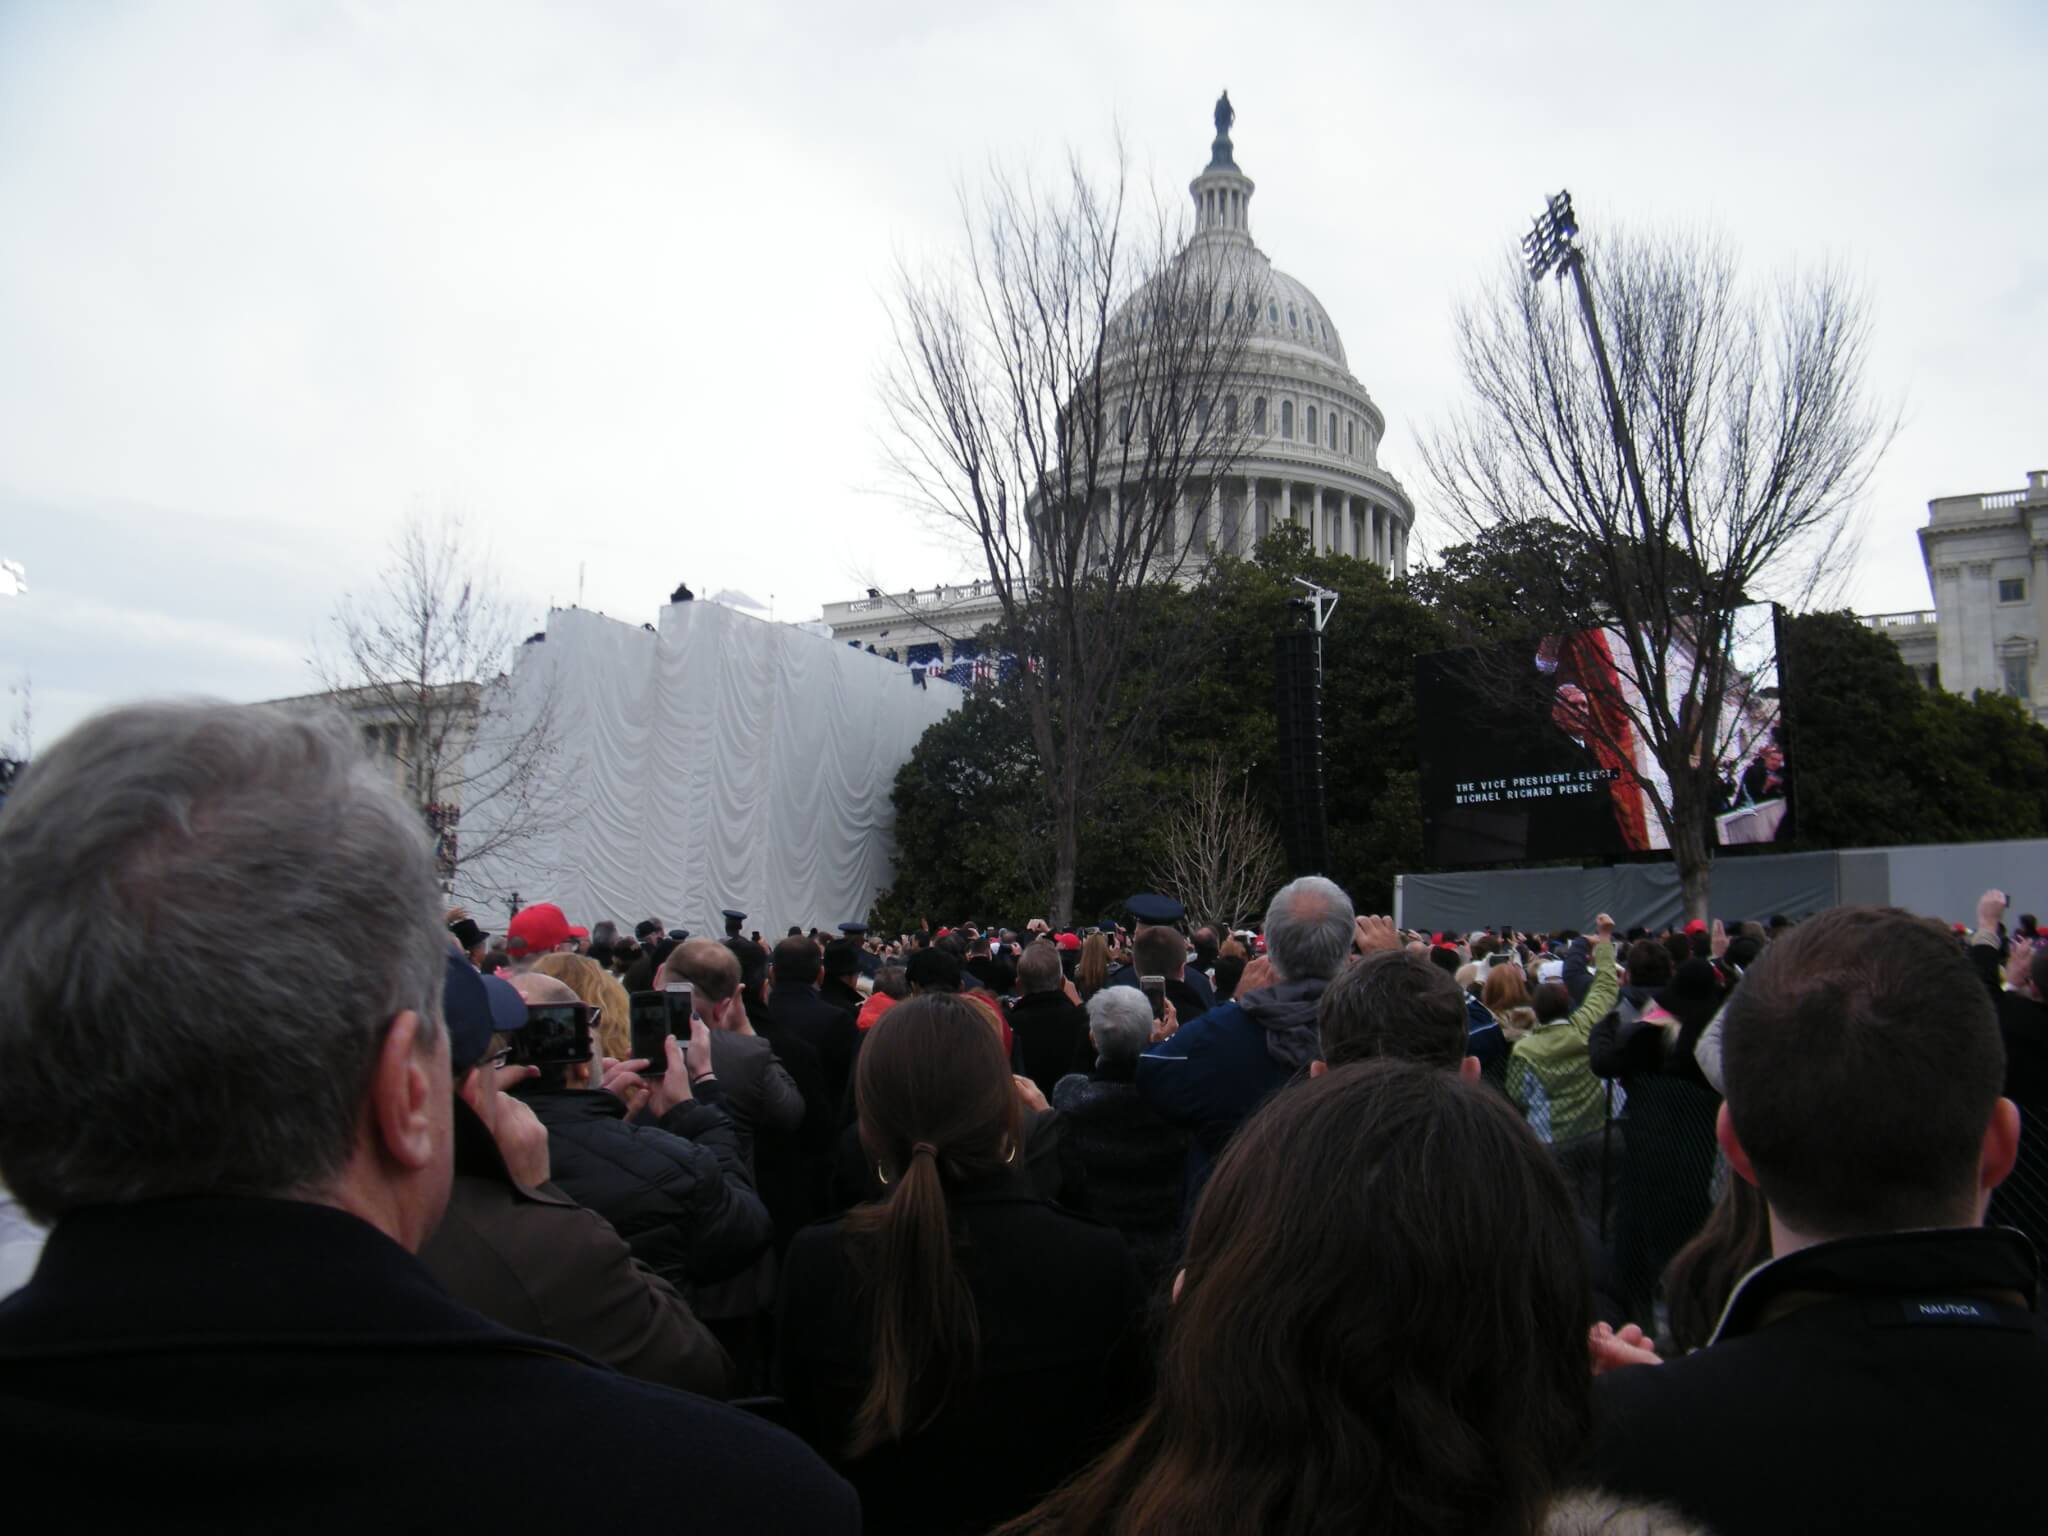 My view of the inauguration